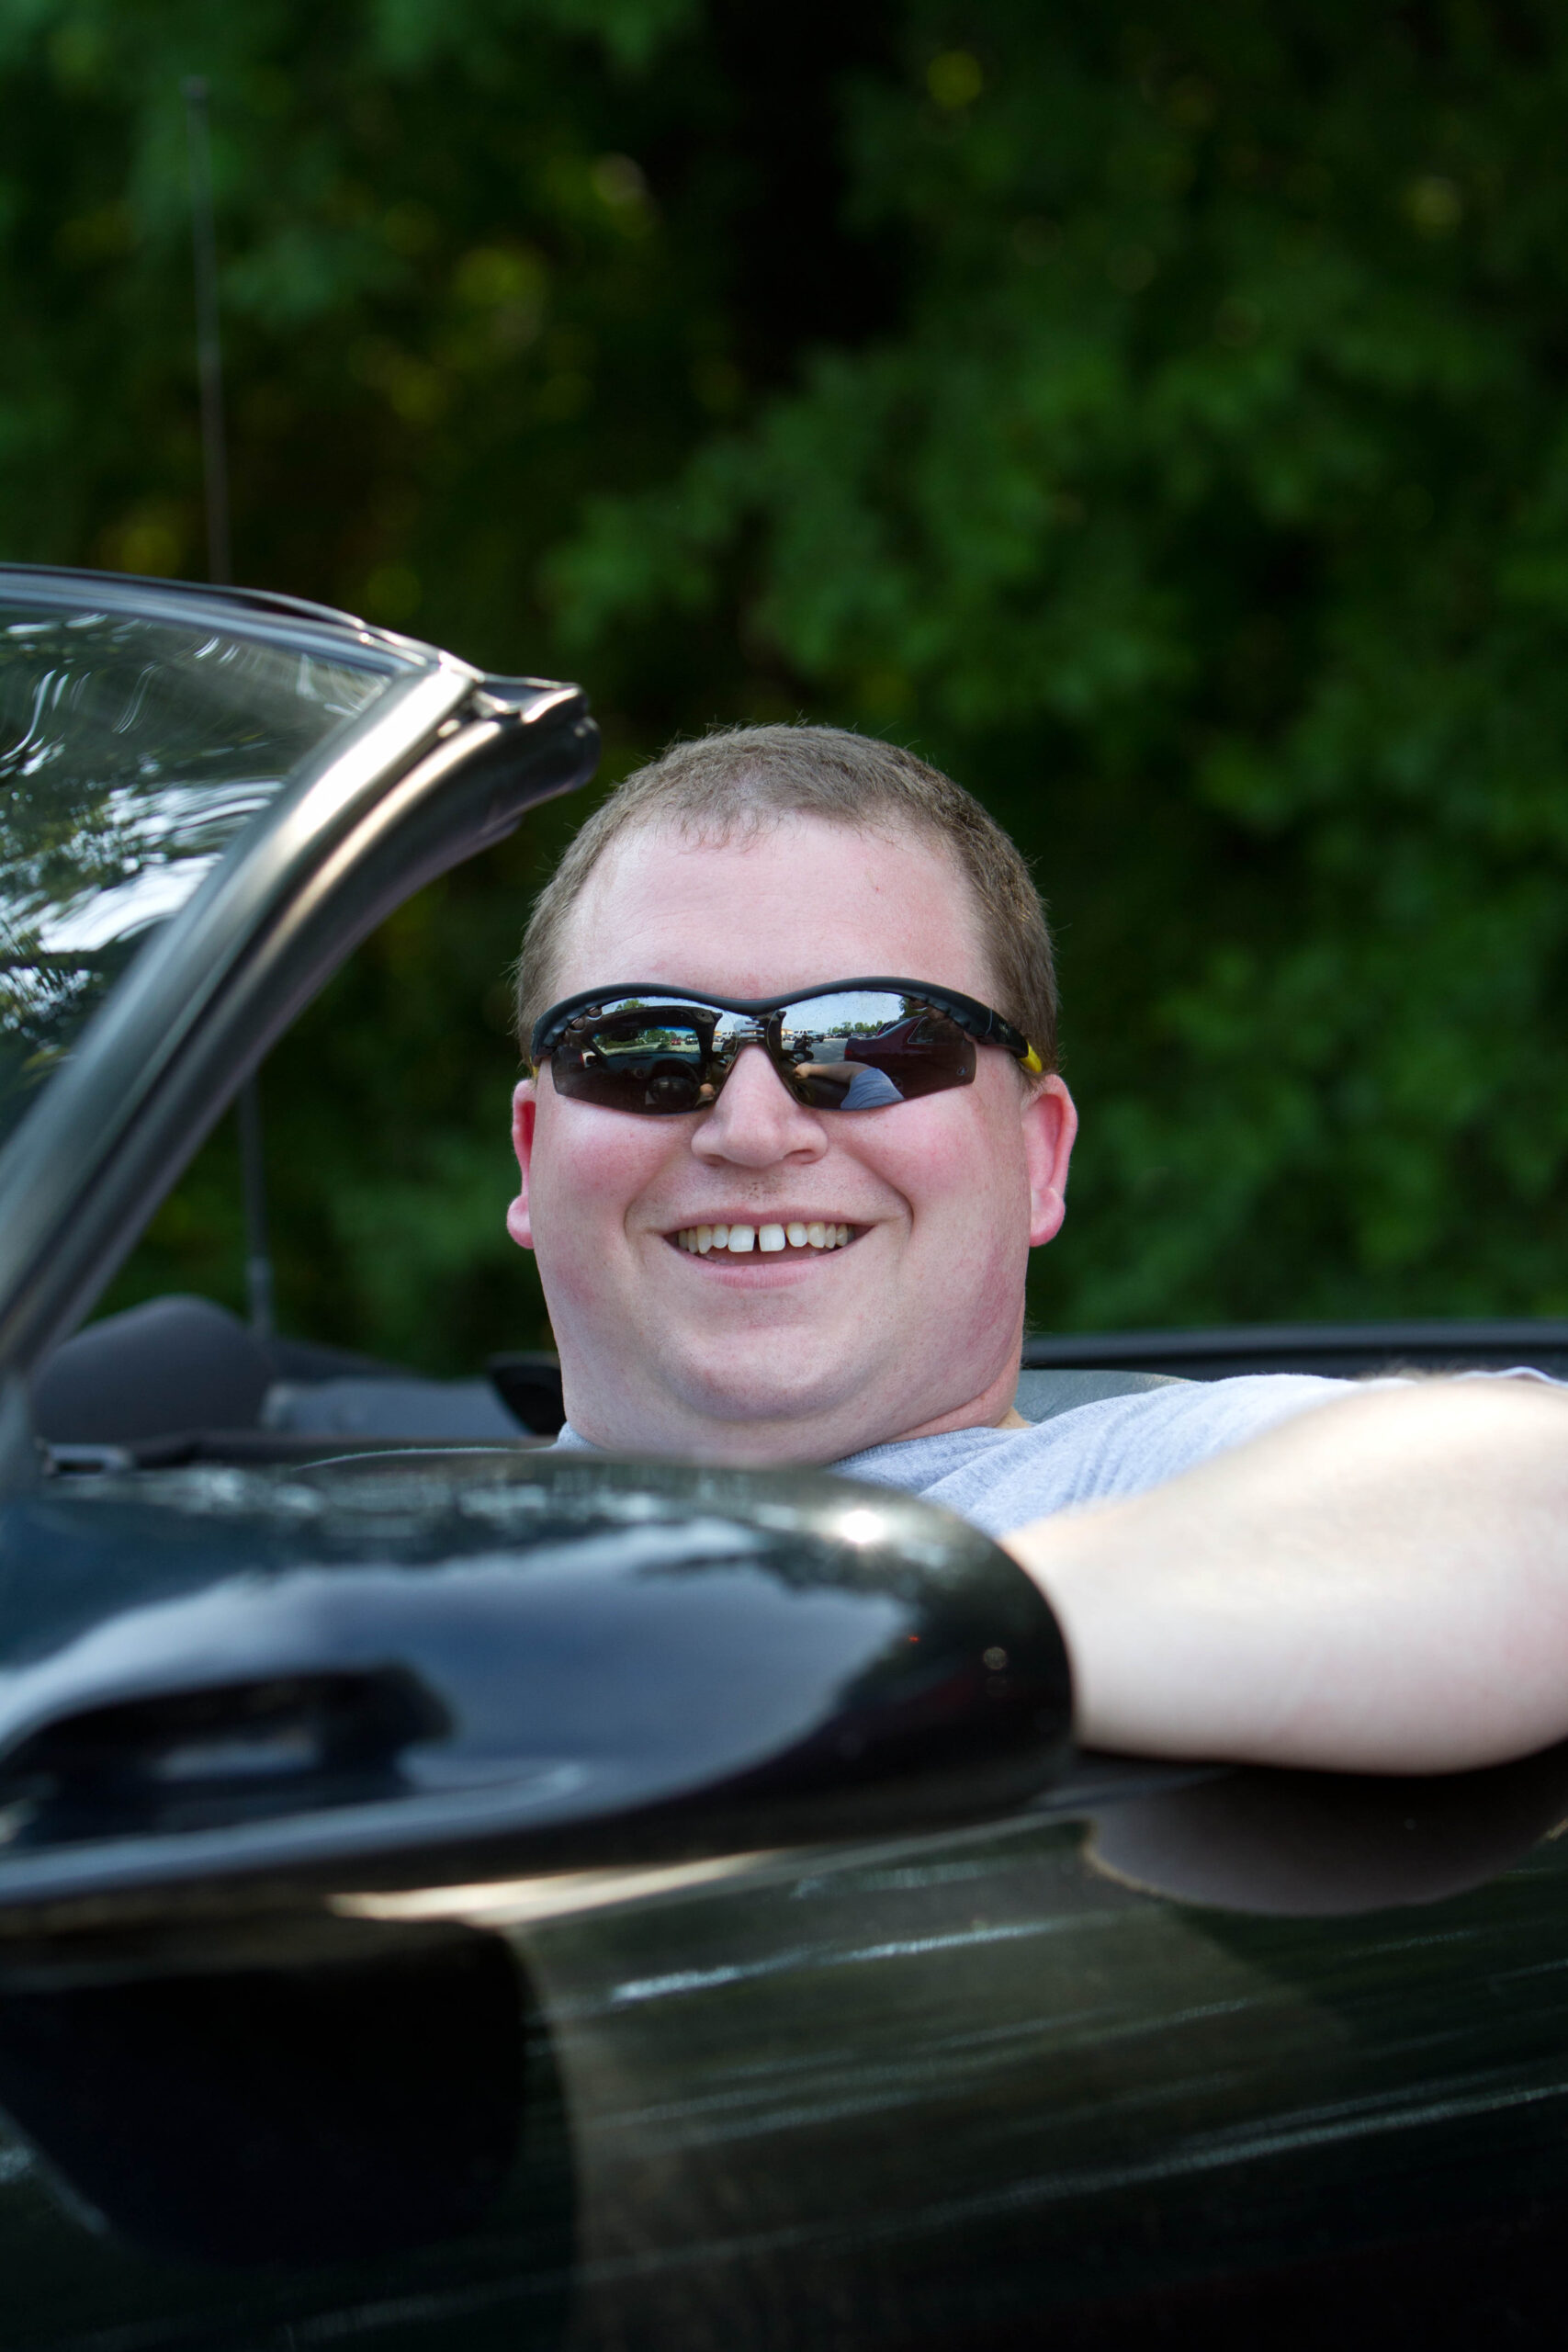 Photo of the author wearing sunglasses driving a car.